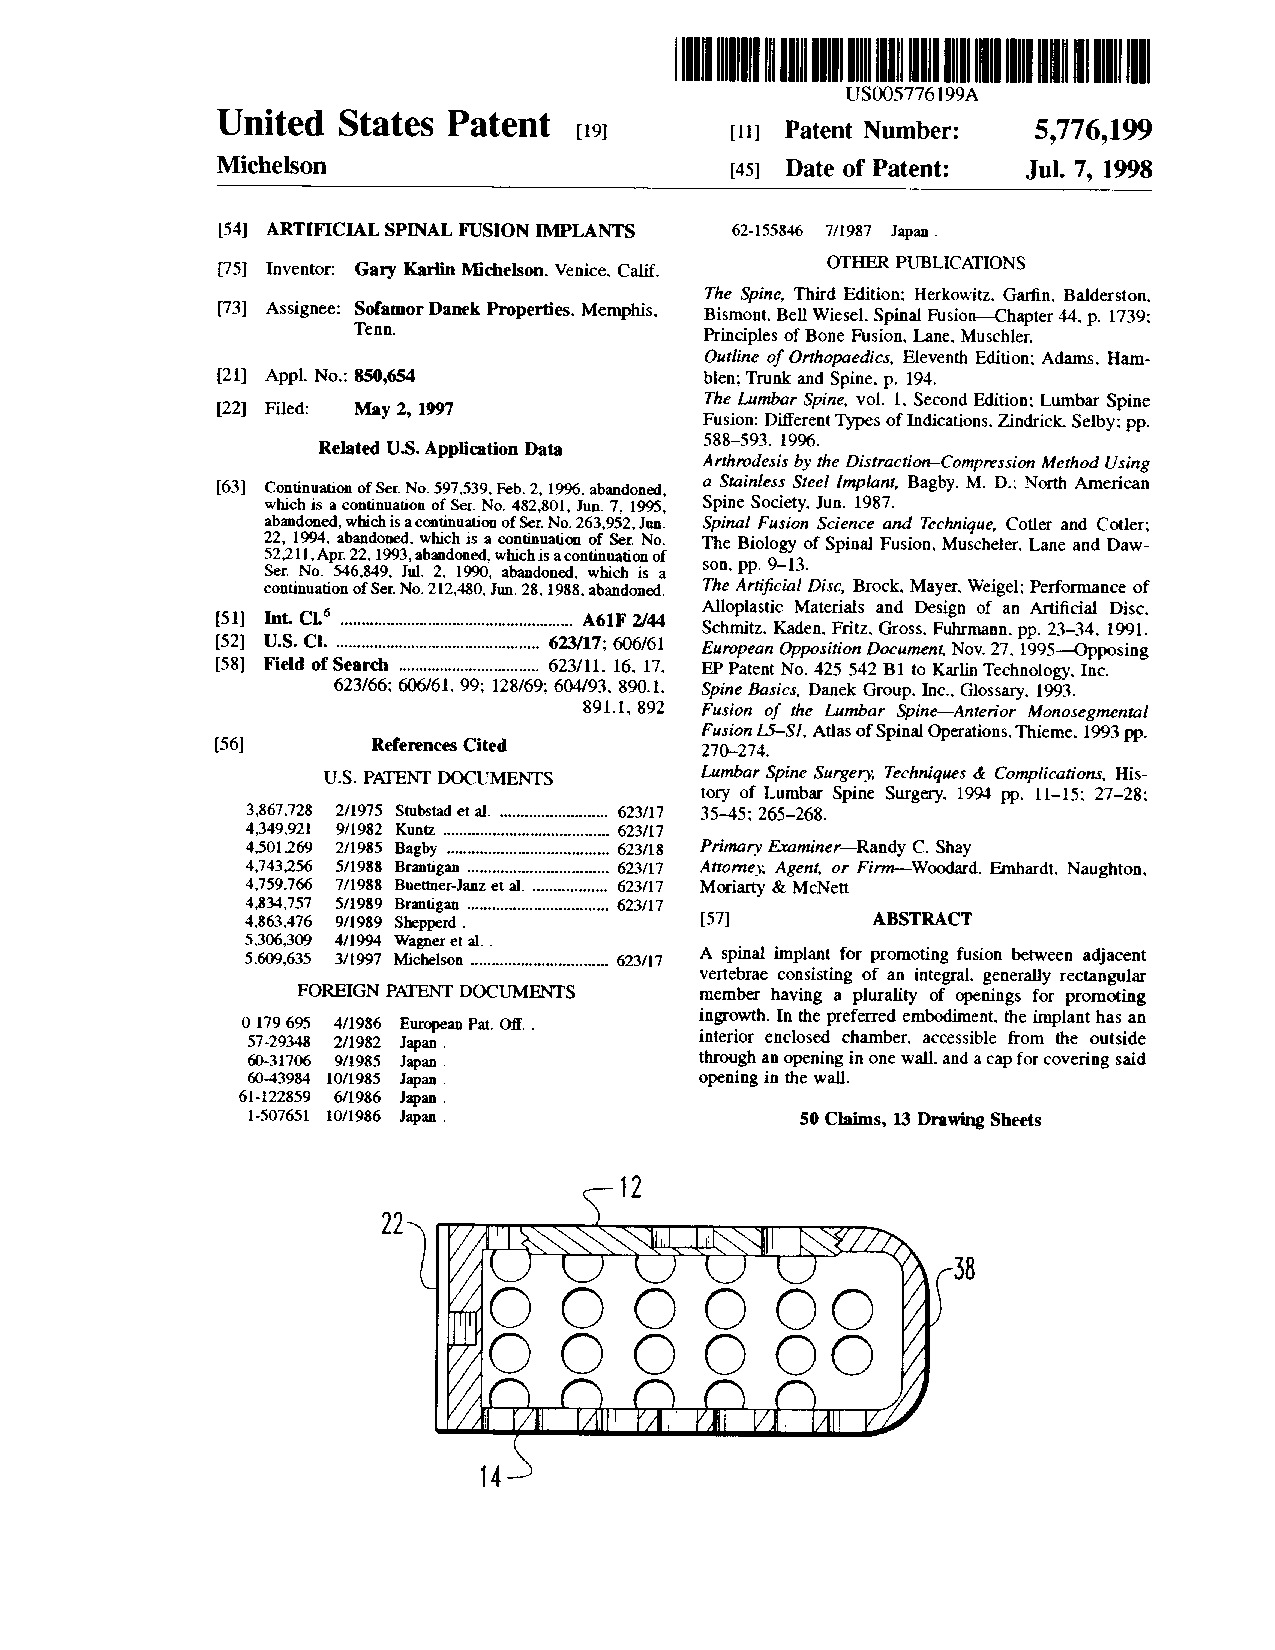 Artificial spinal fusion implants - Patent 5,776,199